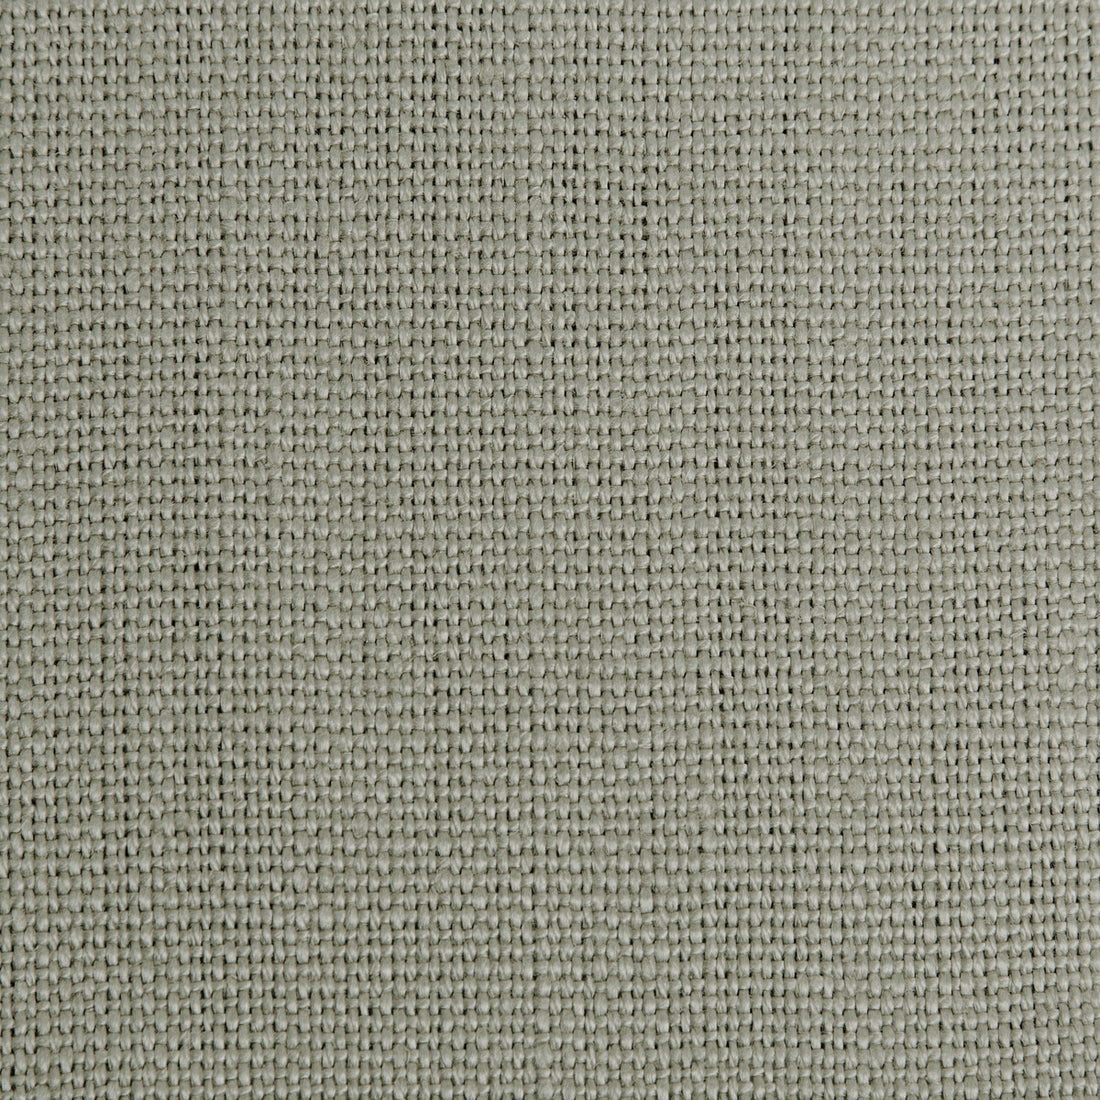 Hampton Linen fabric in cement color - pattern 2012171.1121.0 - by Lee Jofa in the Colour Complements II collection